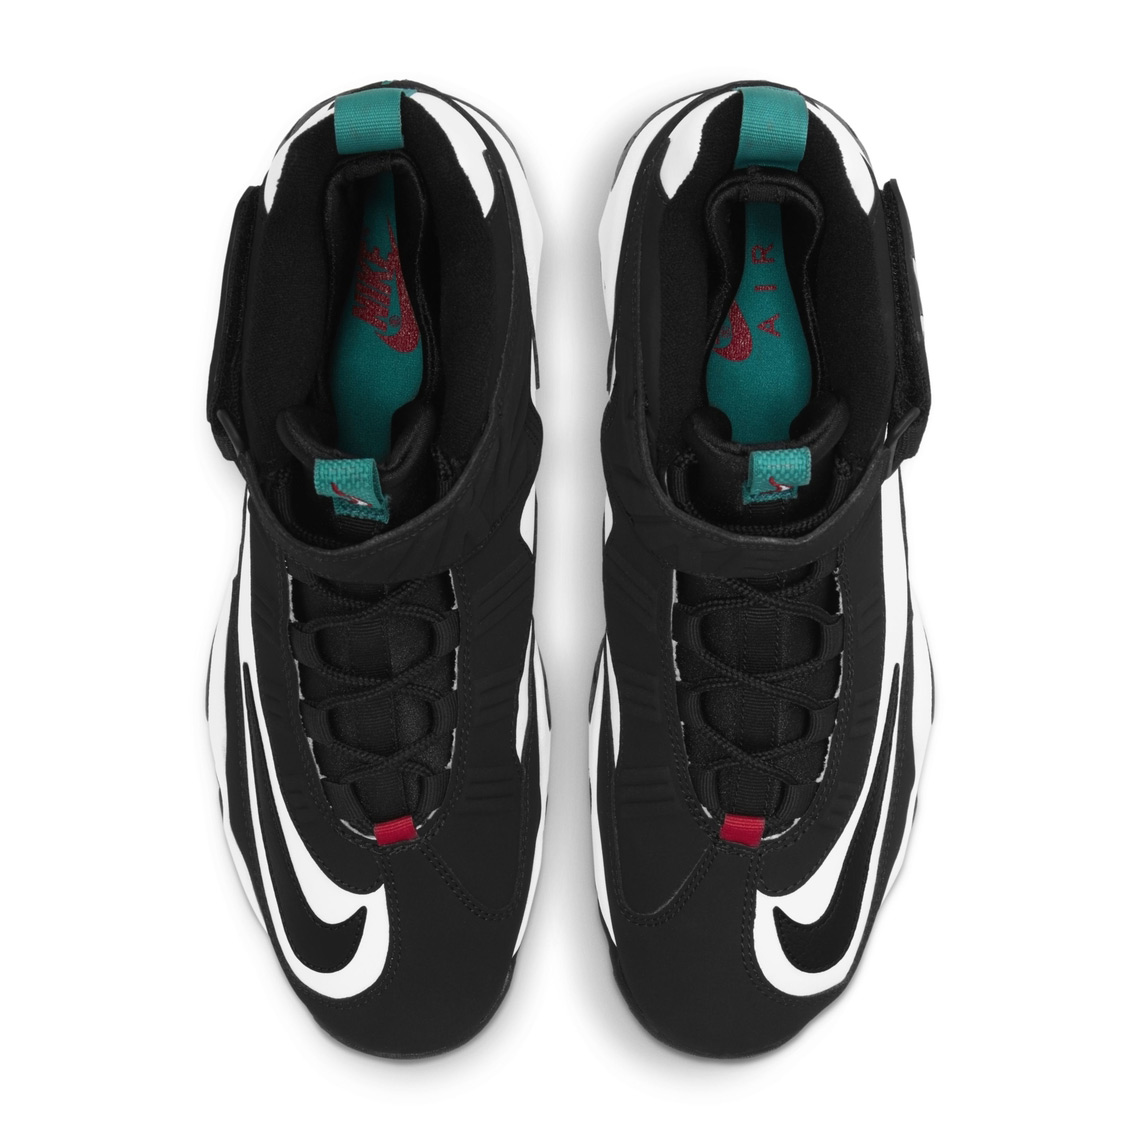 Nike low air griffey max 1 2021 release date 2